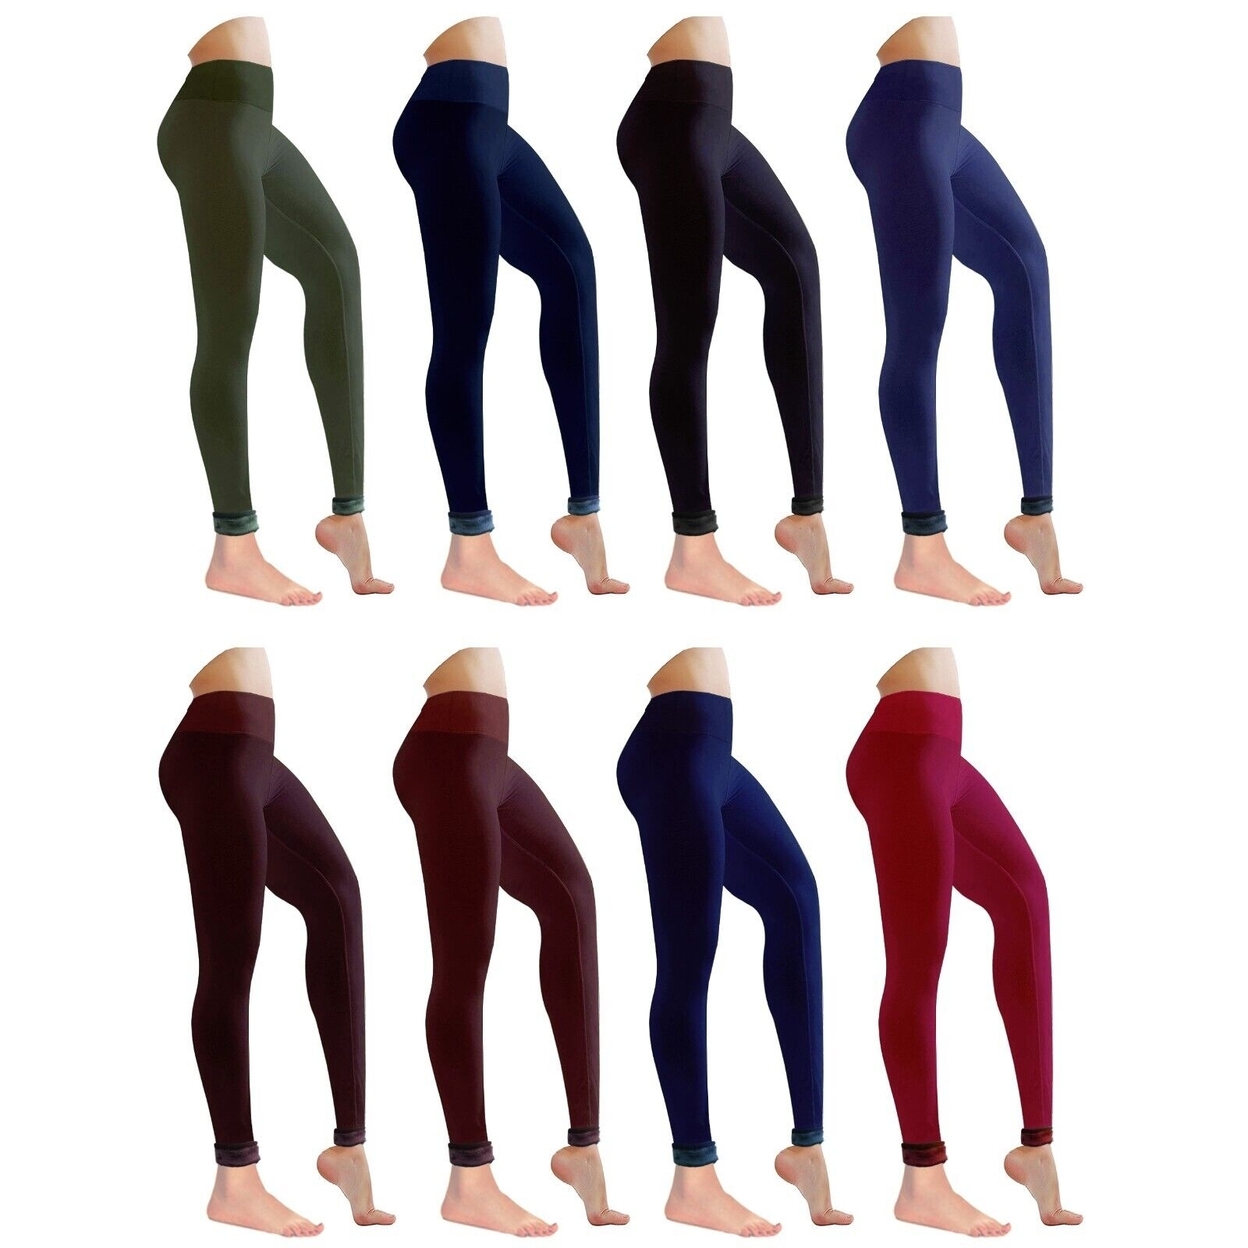 3-Pack: Women's Winter Warm Ultra Soft Cozy Fur Lined Leggings - Assorted, X-large